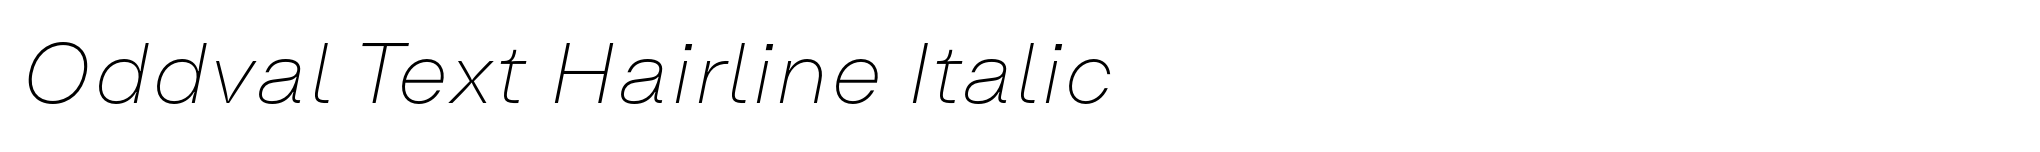 Oddval Text Hairline Italic image